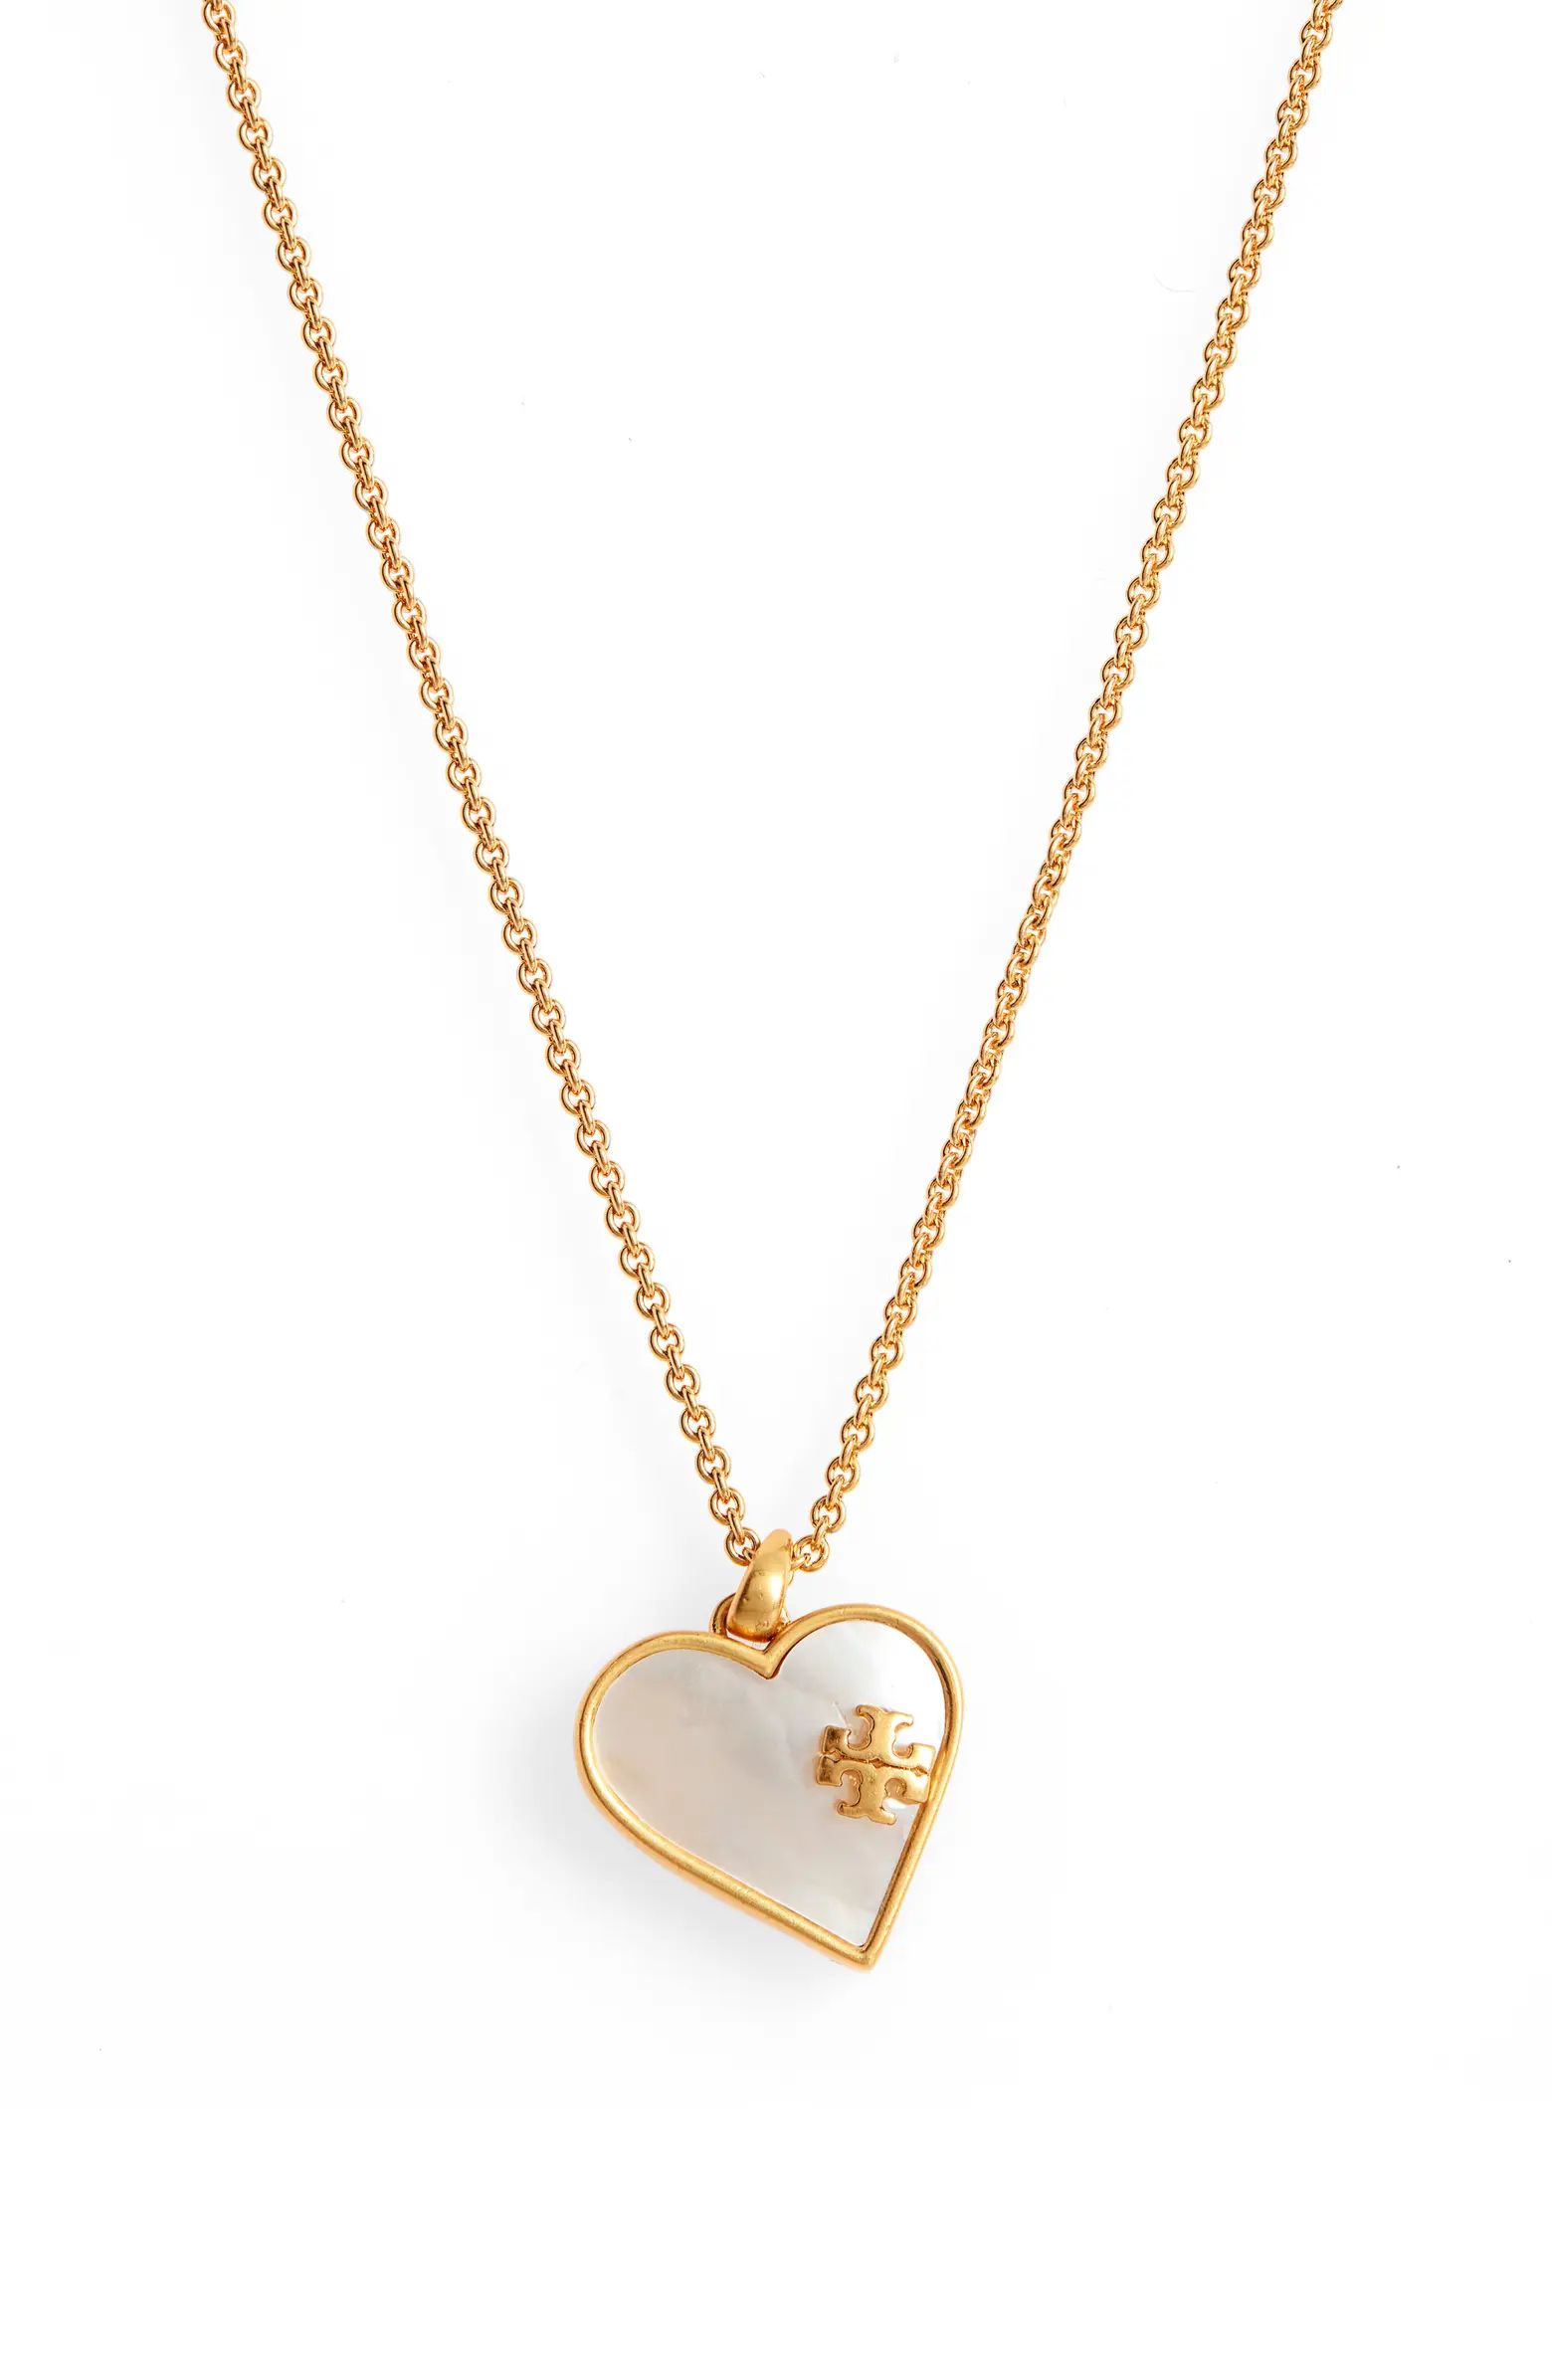 Tory Burch Heart Pendant Necklace | Nordstrom | Nordstrom